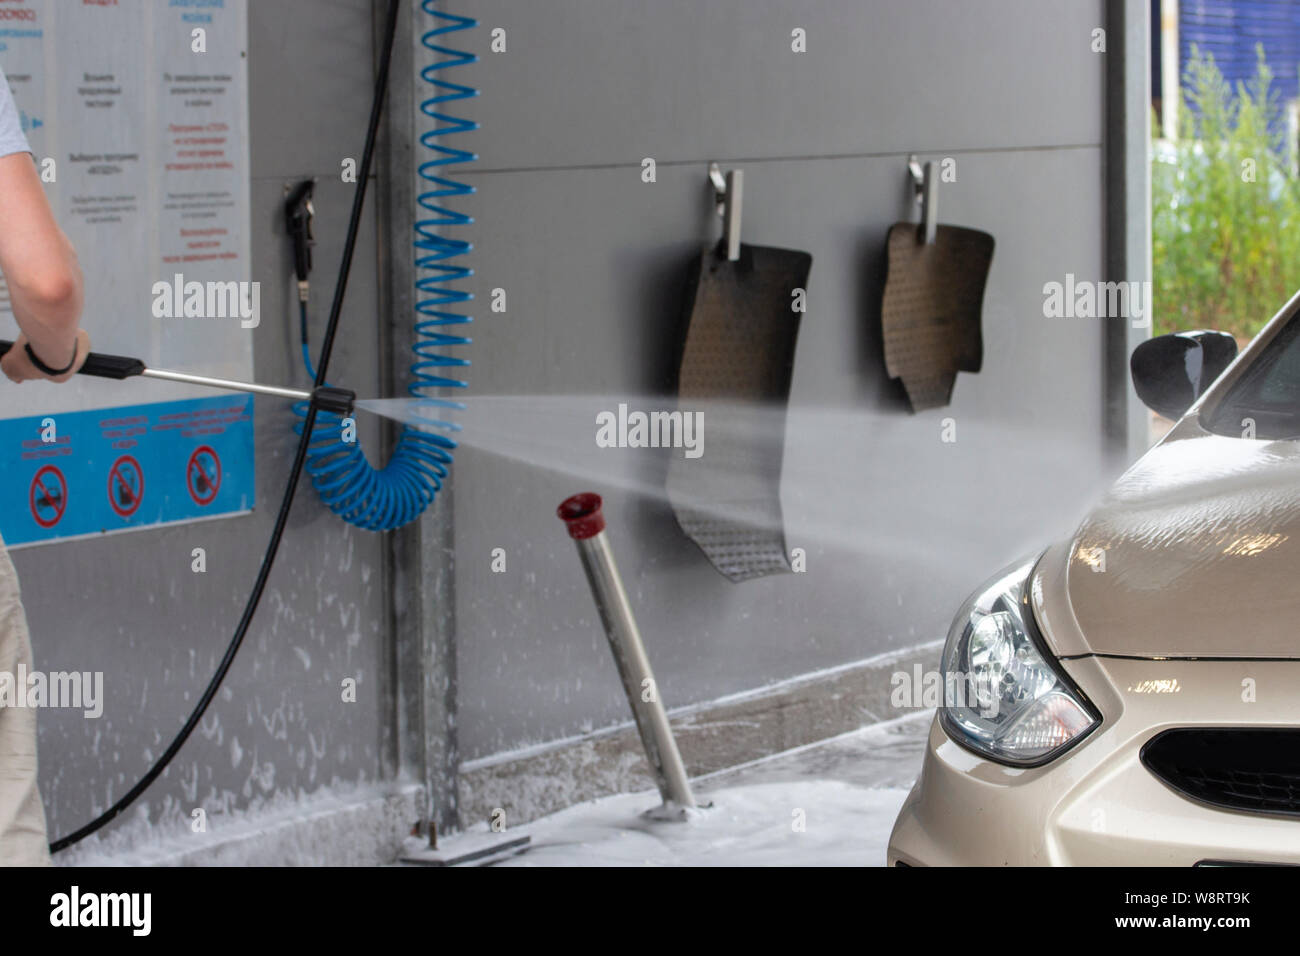 Car wash water jet is aimed at the car sedan, car mats hanging on clothespins, service cleaning Stock Photo